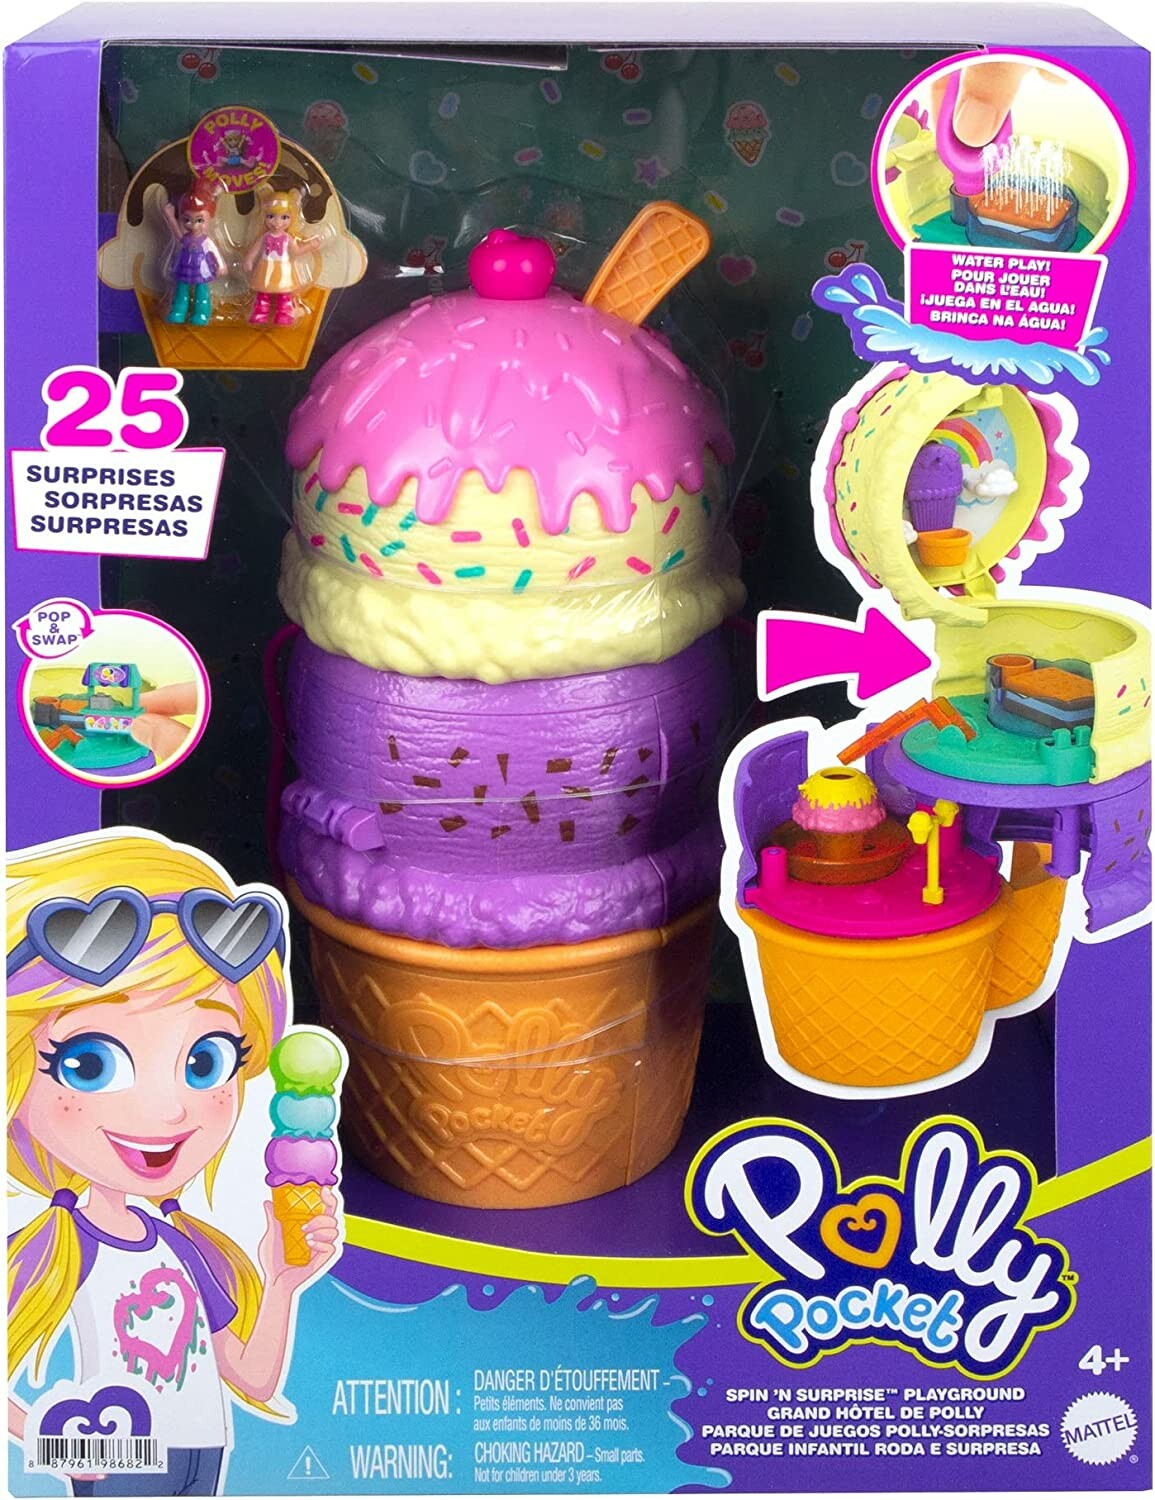 Polly Pocket coffret multifacettes glace, Figurines